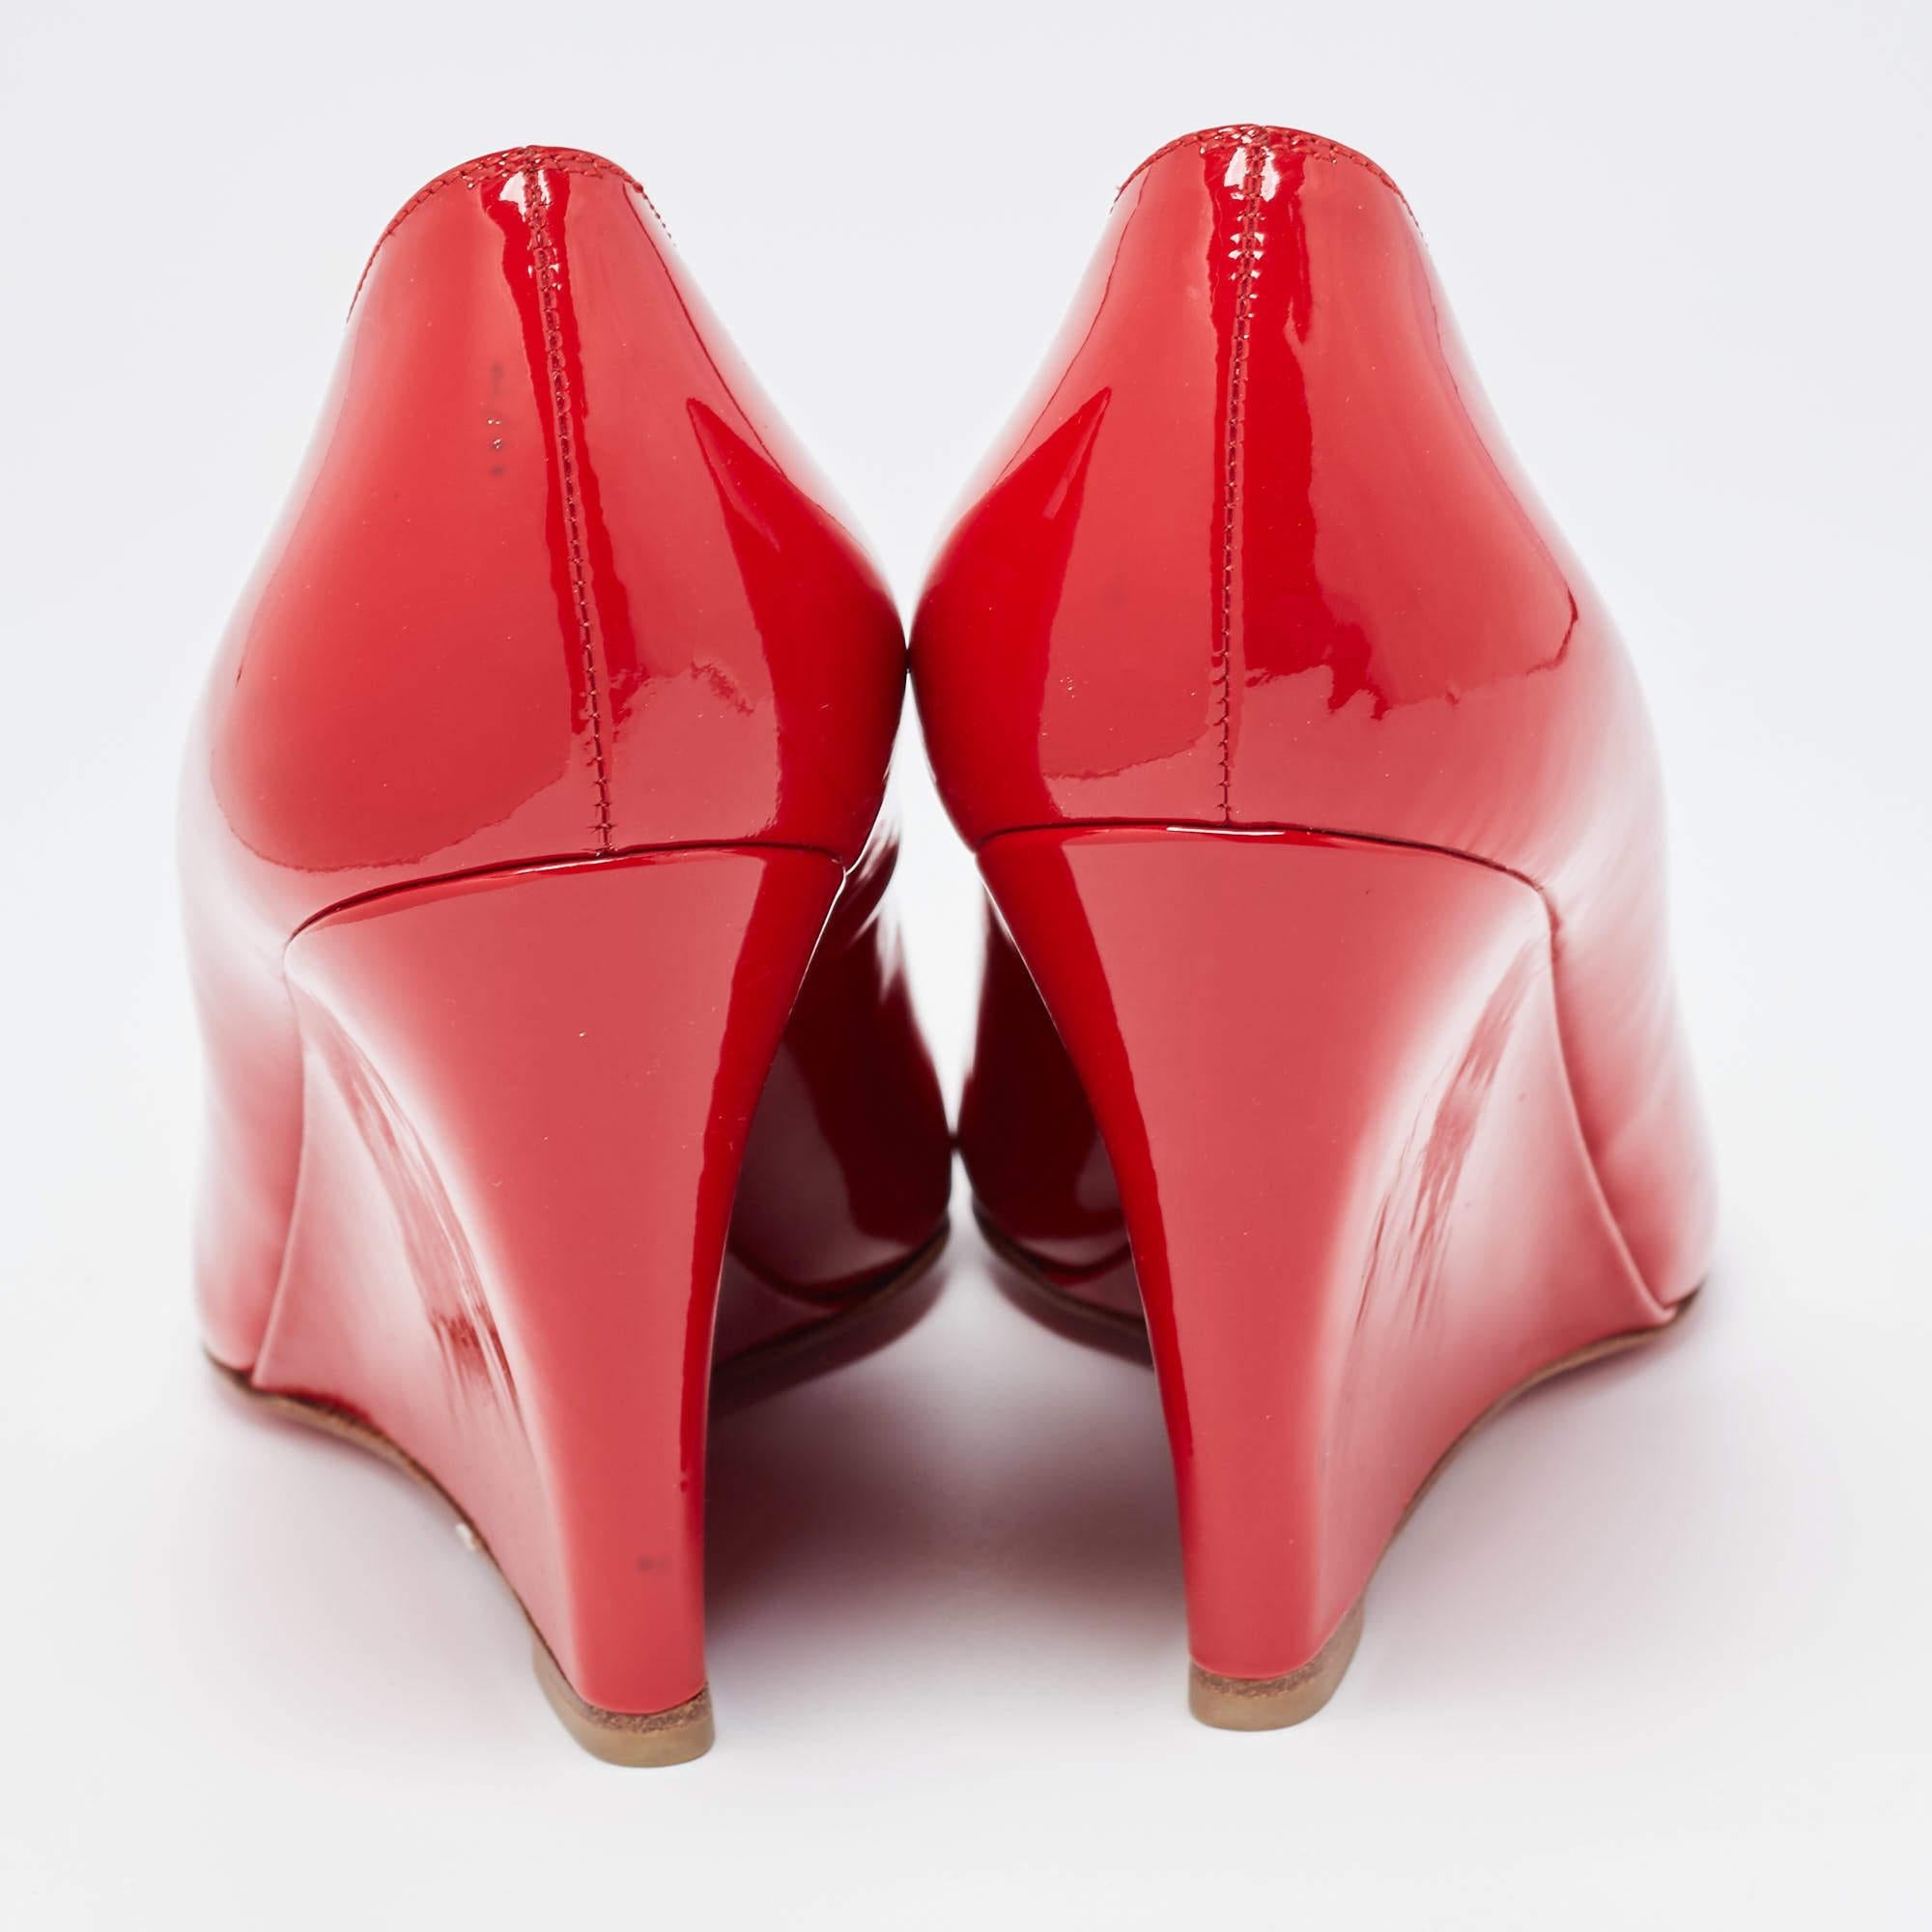 Christian Louboutin Red Patent Leather Ron Ron Wedge Pumps Size 38.5 In Excellent Condition For Sale In Dubai, Al Qouz 2